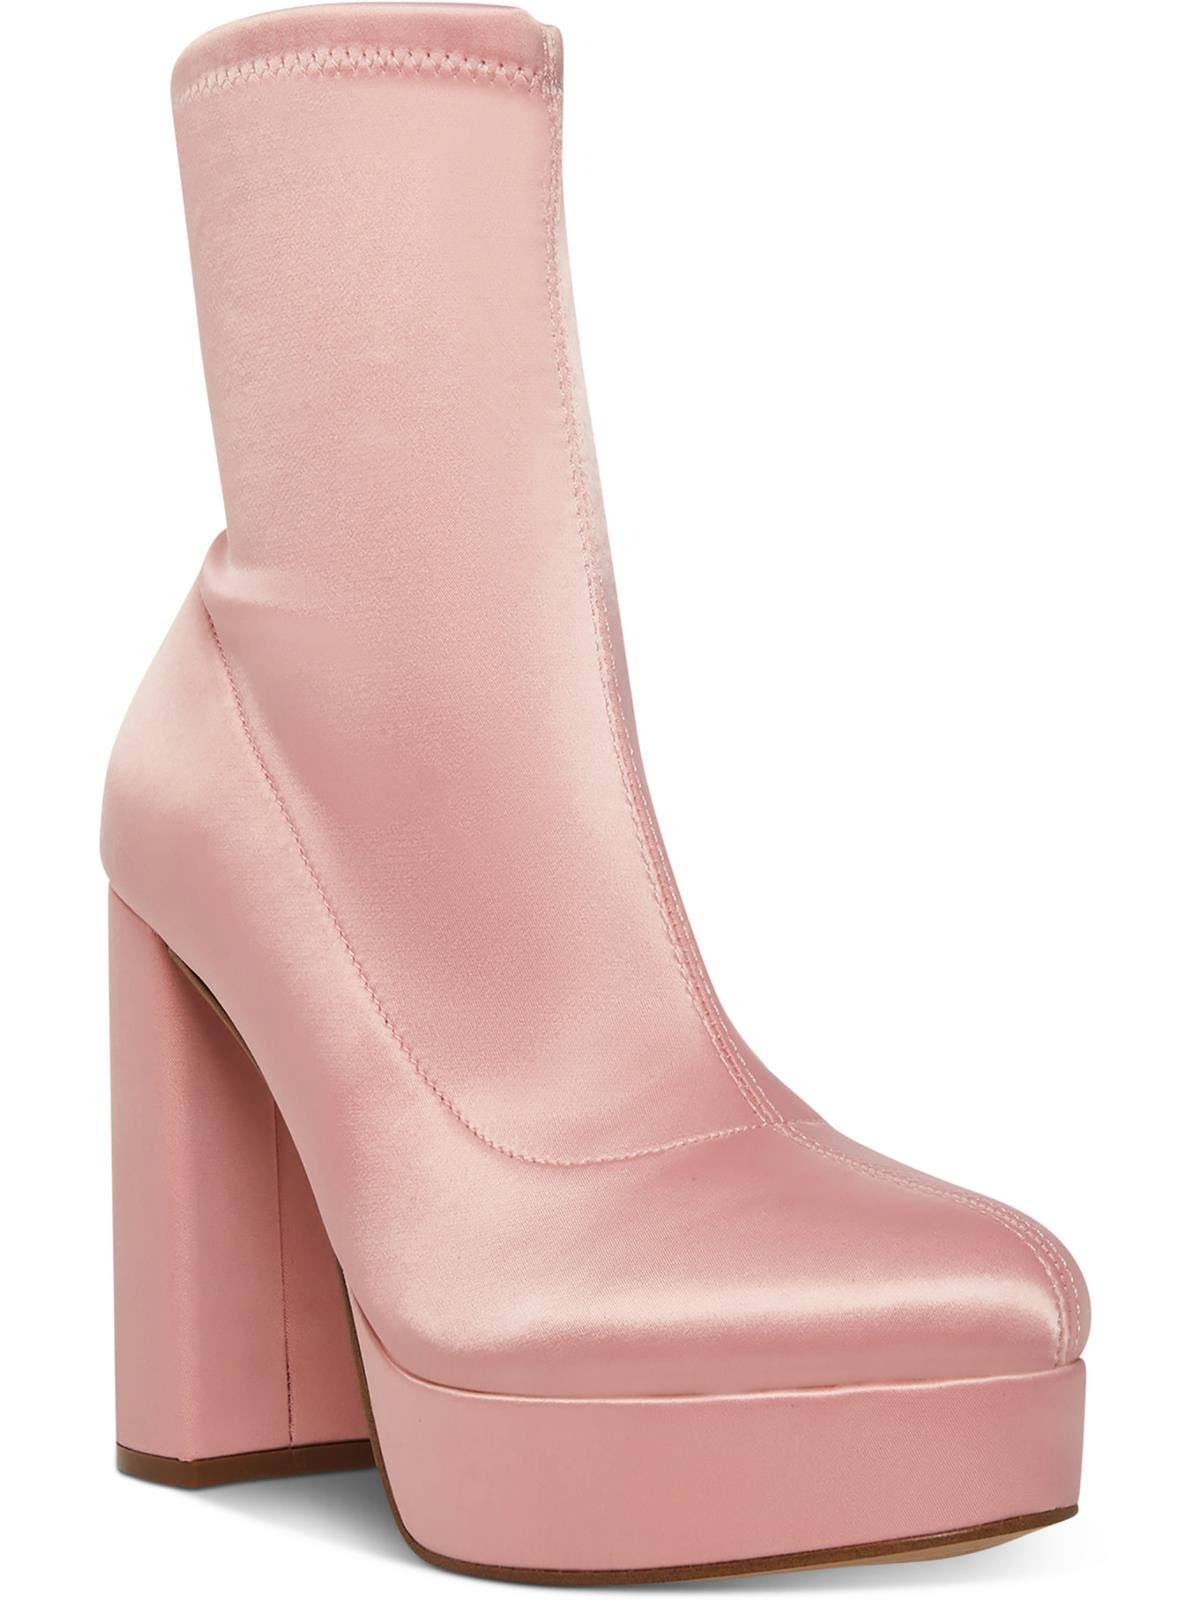 Stylish Pink Satin Heels Ankle Boots by Madden Girl | Image